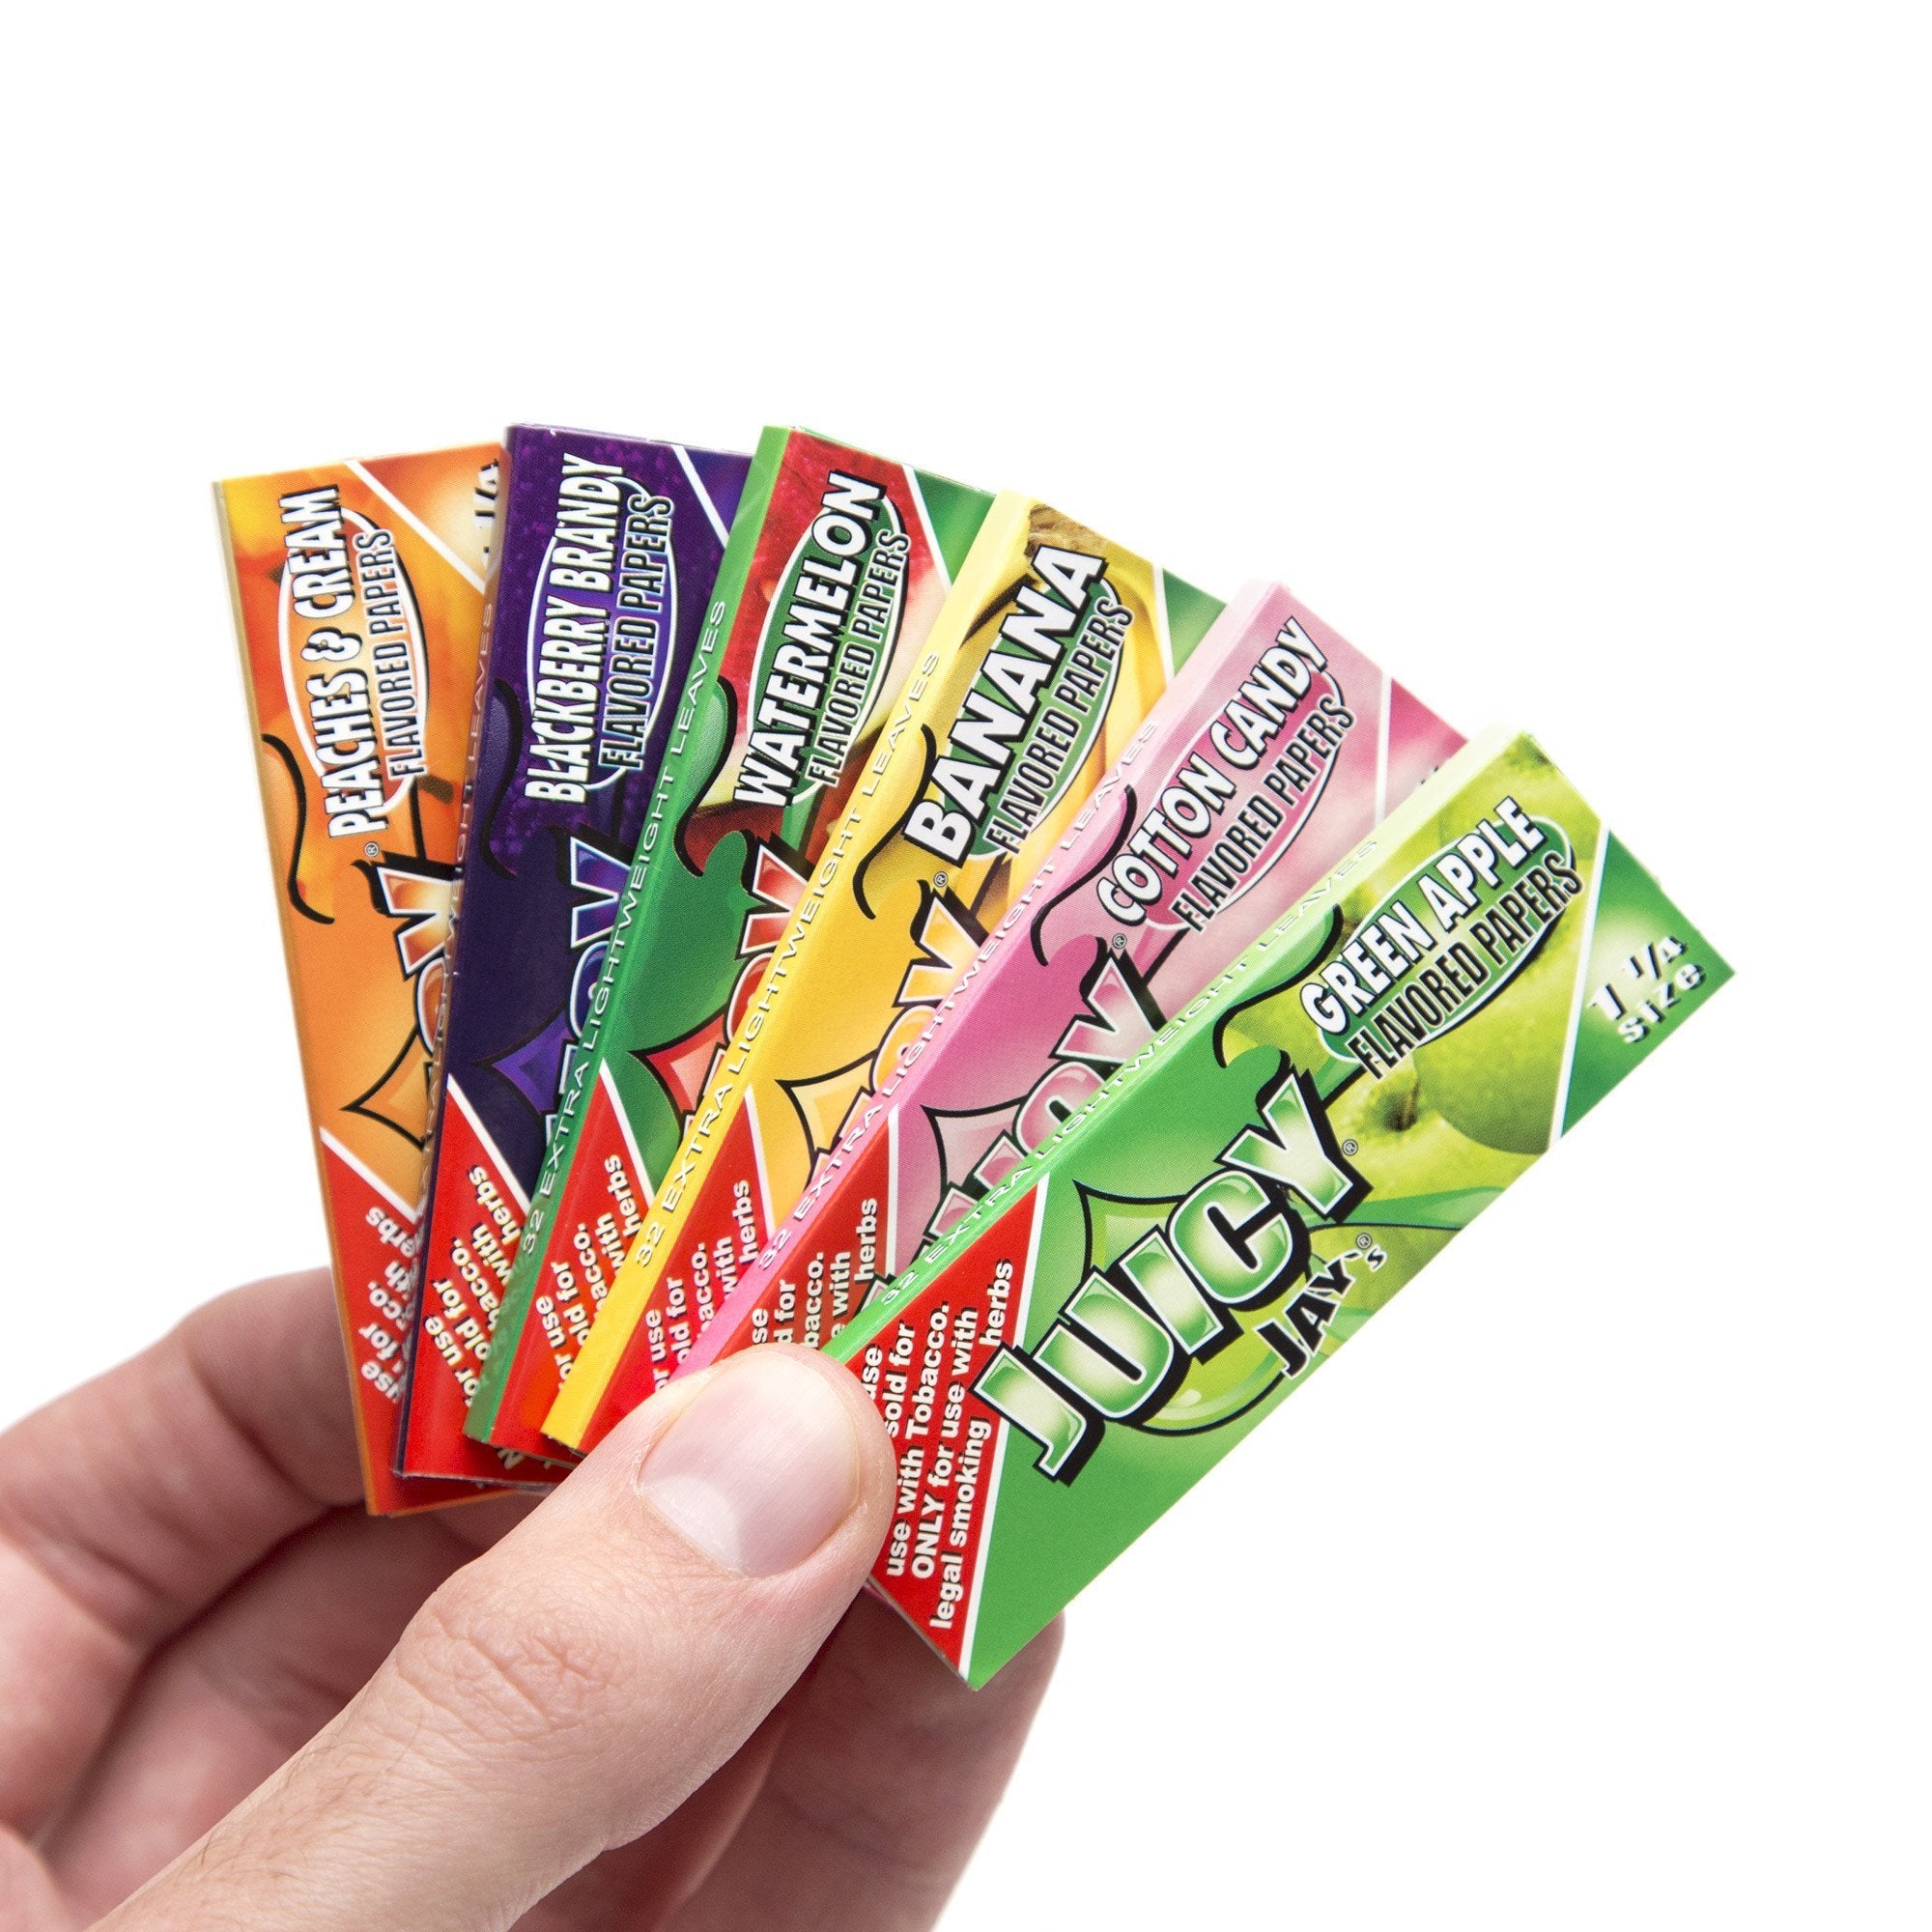 Juicy Jay's 1 1/4in Flavored Papers - Peaches & Cream / $ 2.79 at 